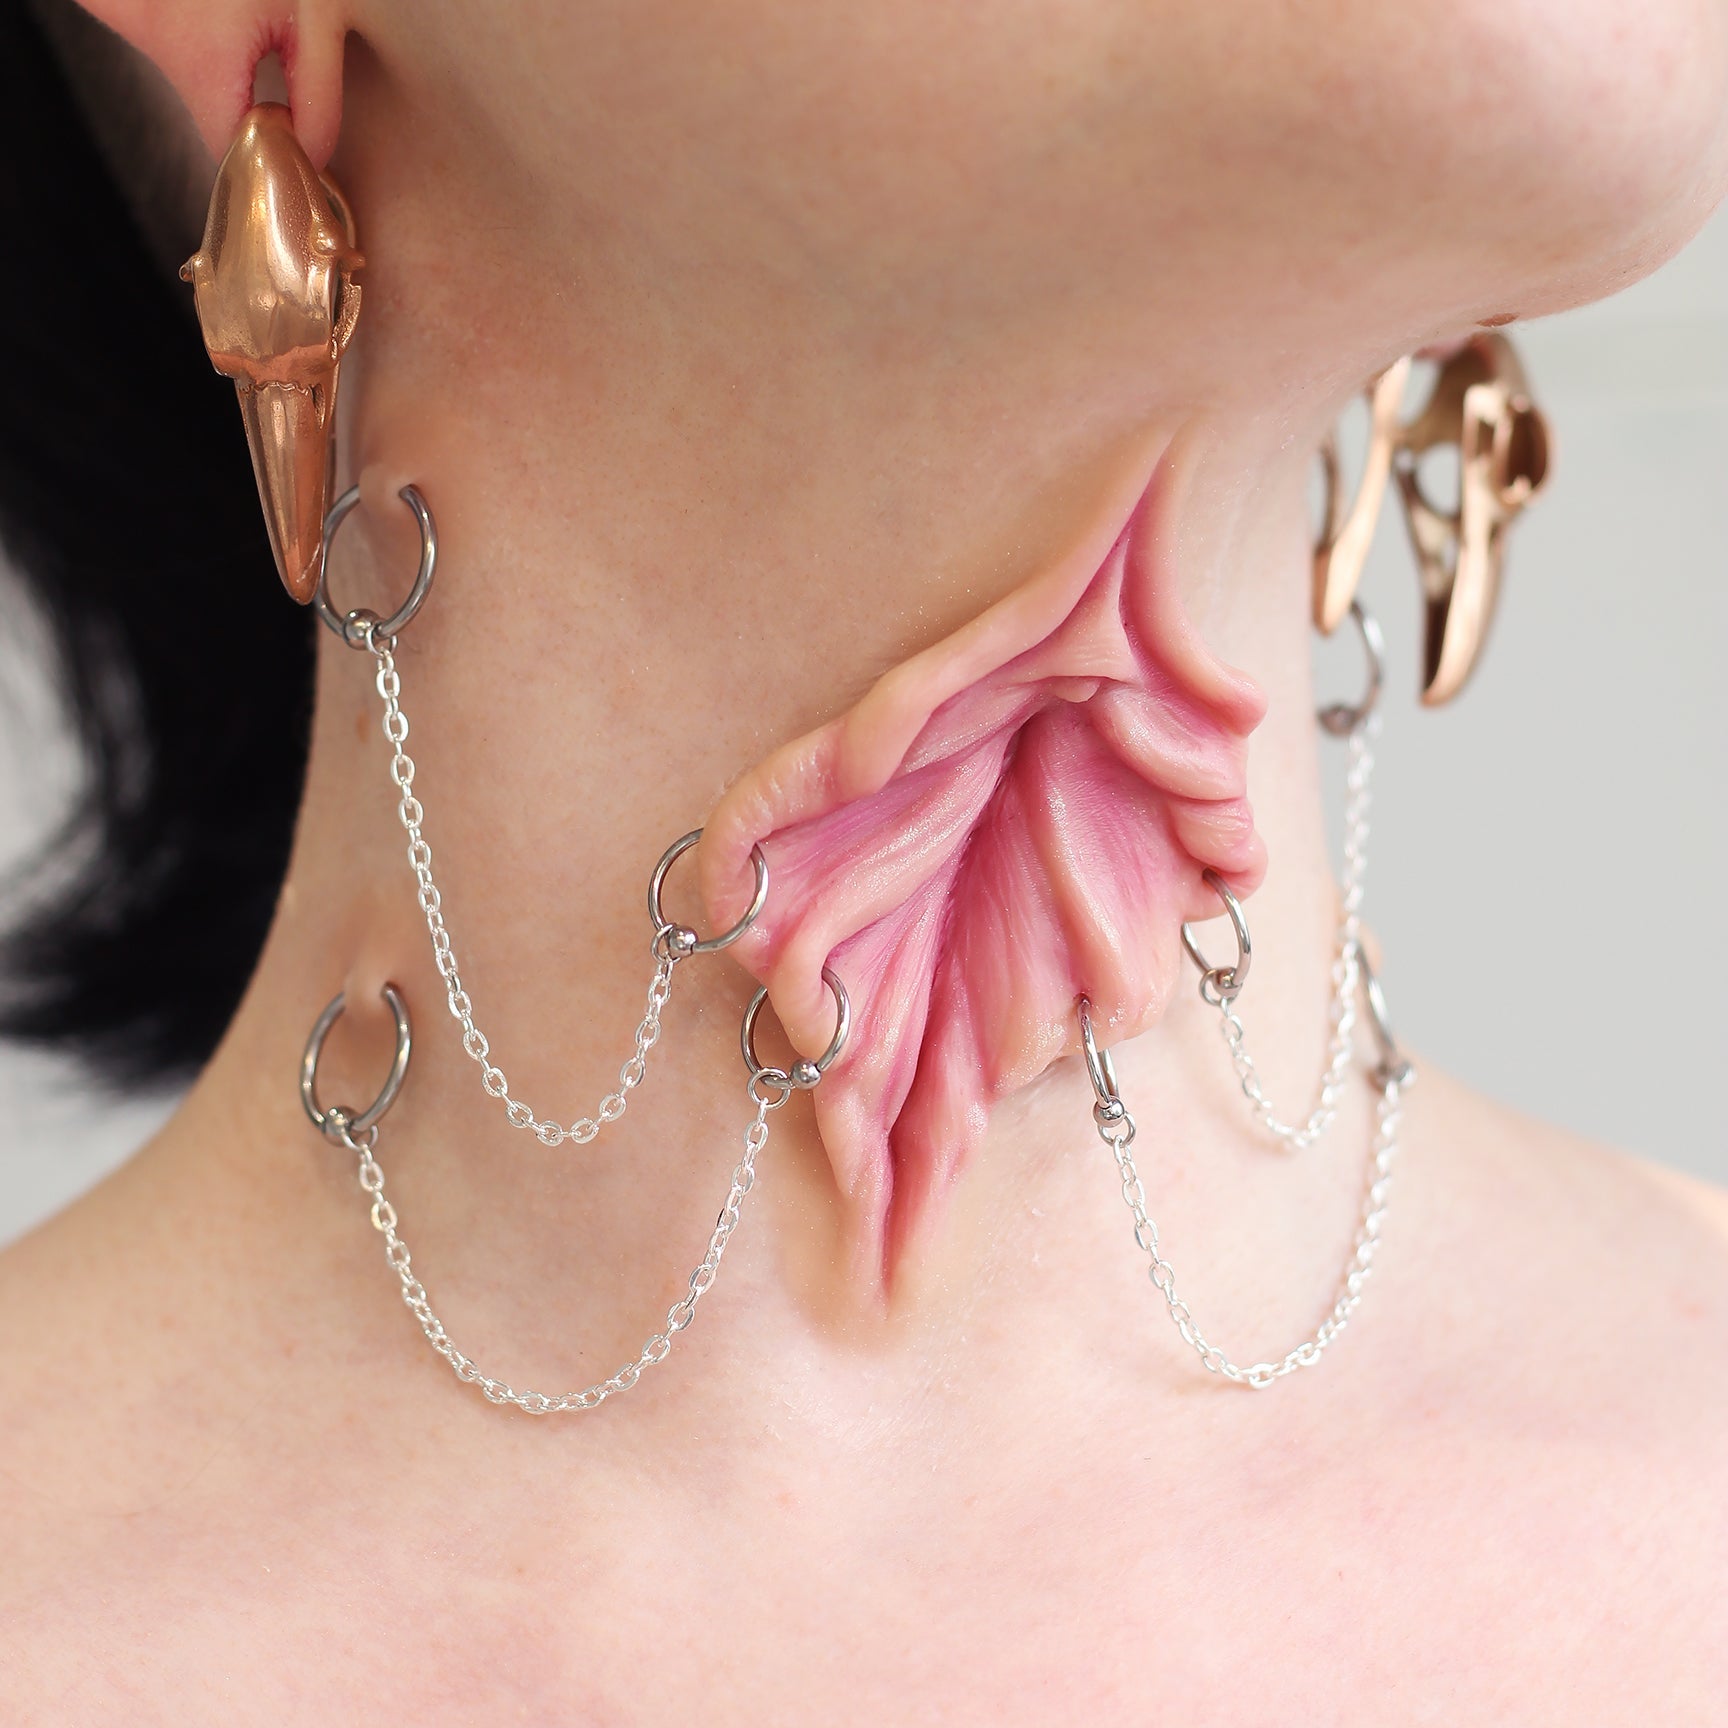 Woman's neck with a flower choker and surface piercing prosthetics